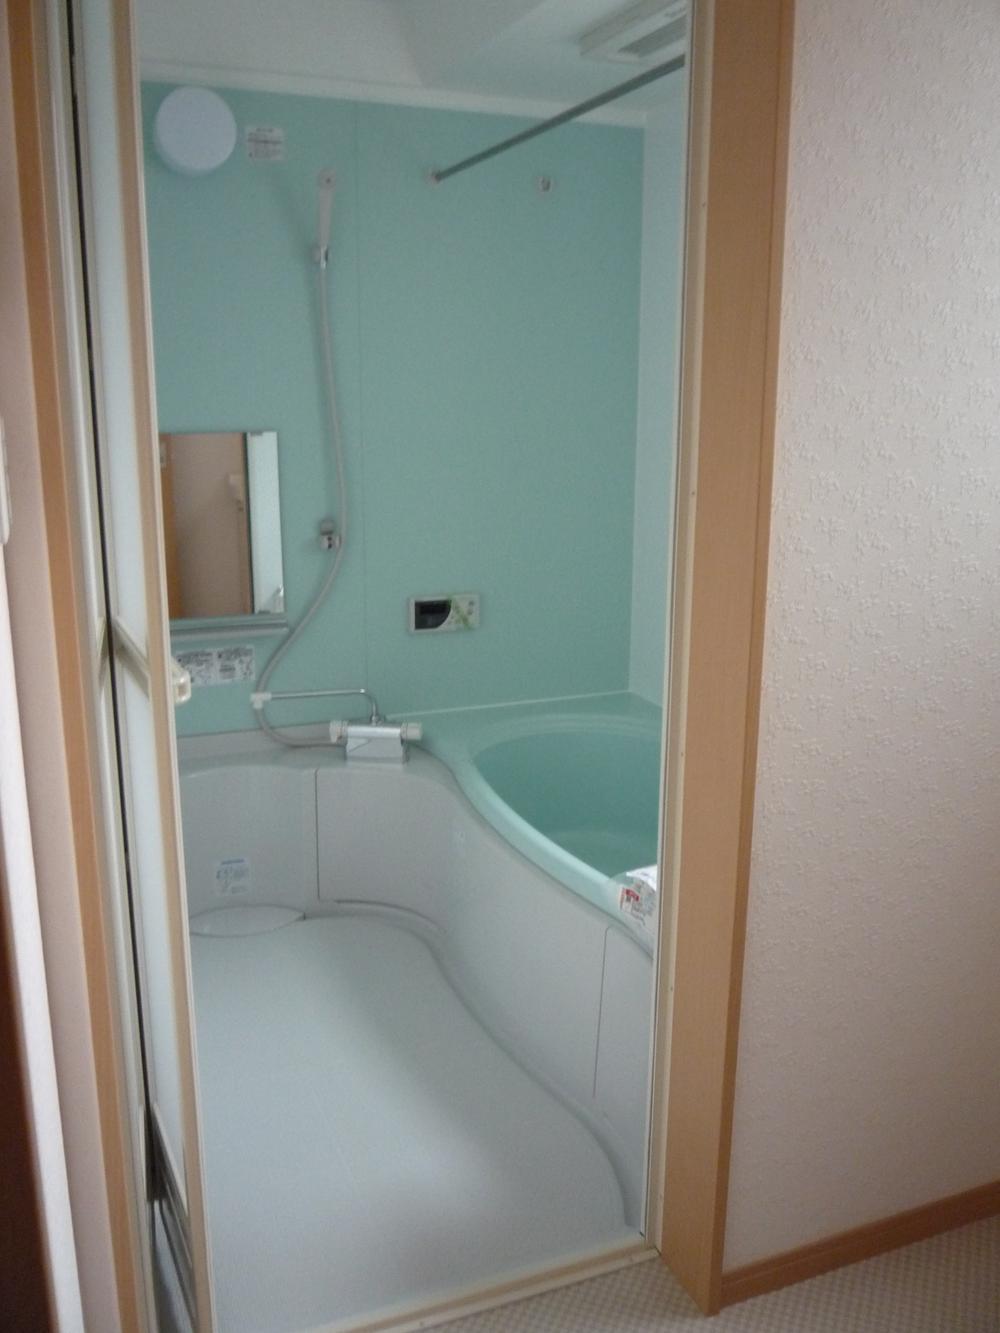 Same specifications photo (bathroom). With bathroom dryer